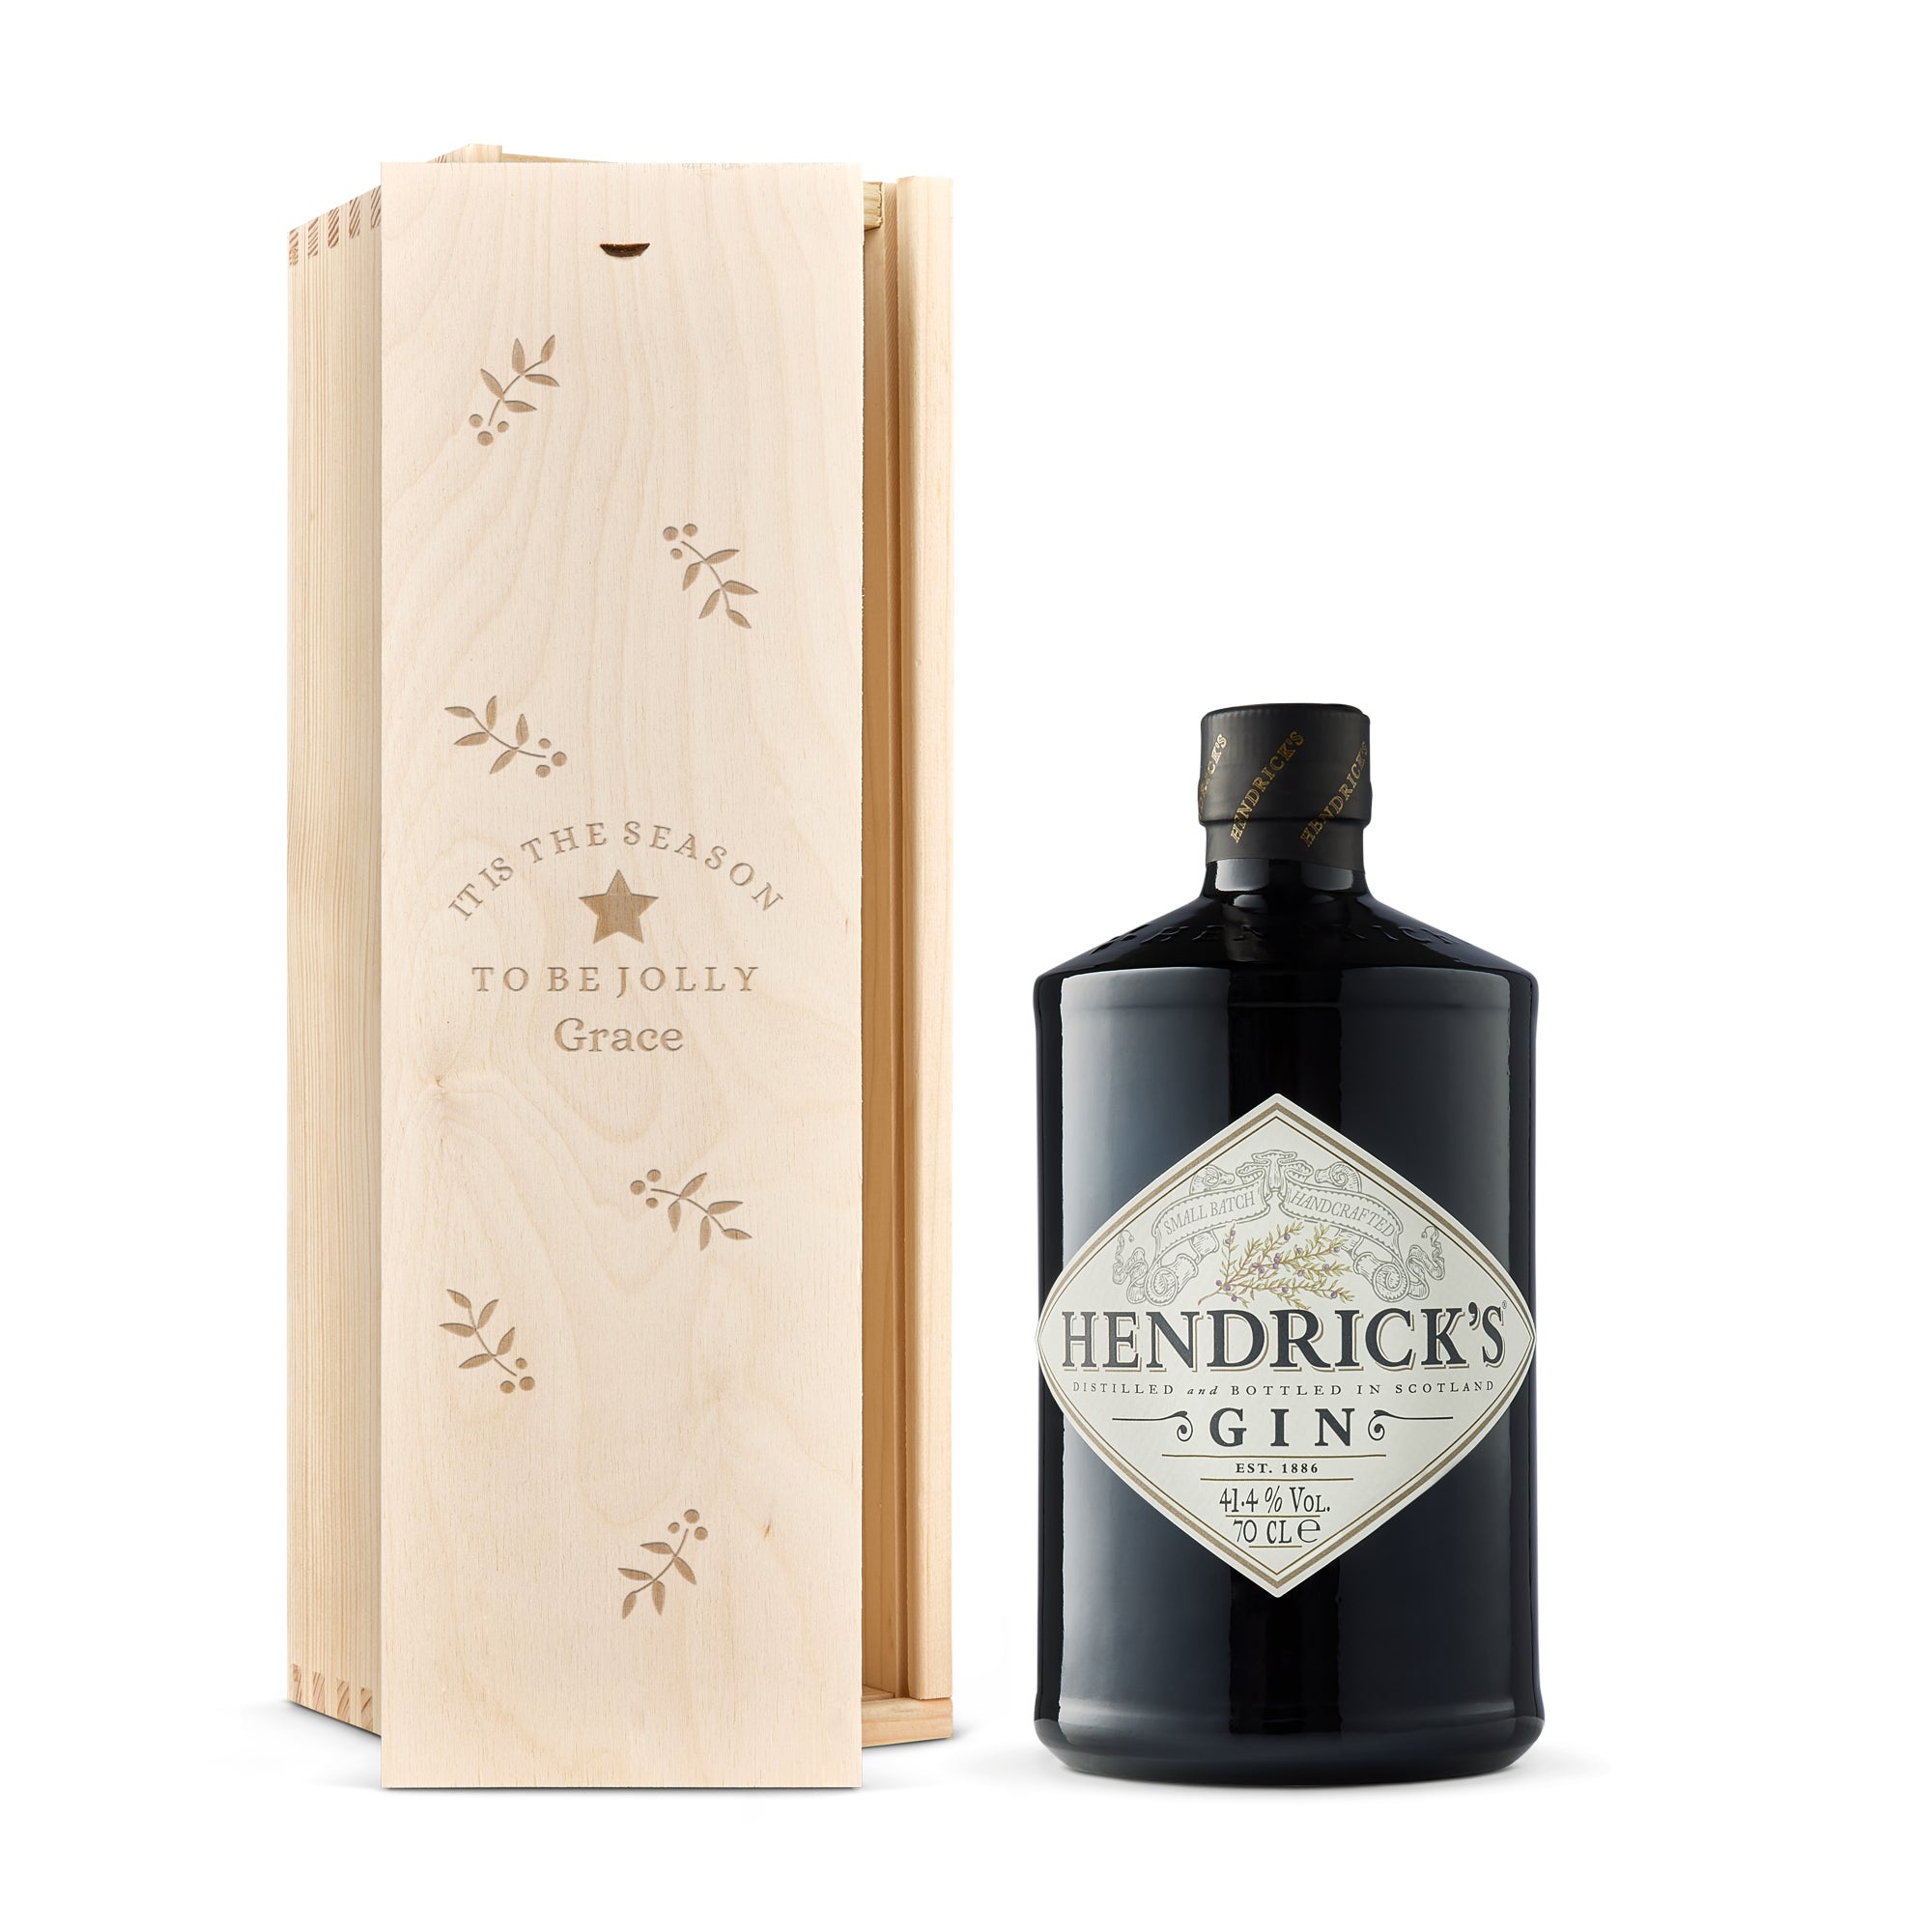 Personalised gin gift - Hendrick's - Engraved wooden case